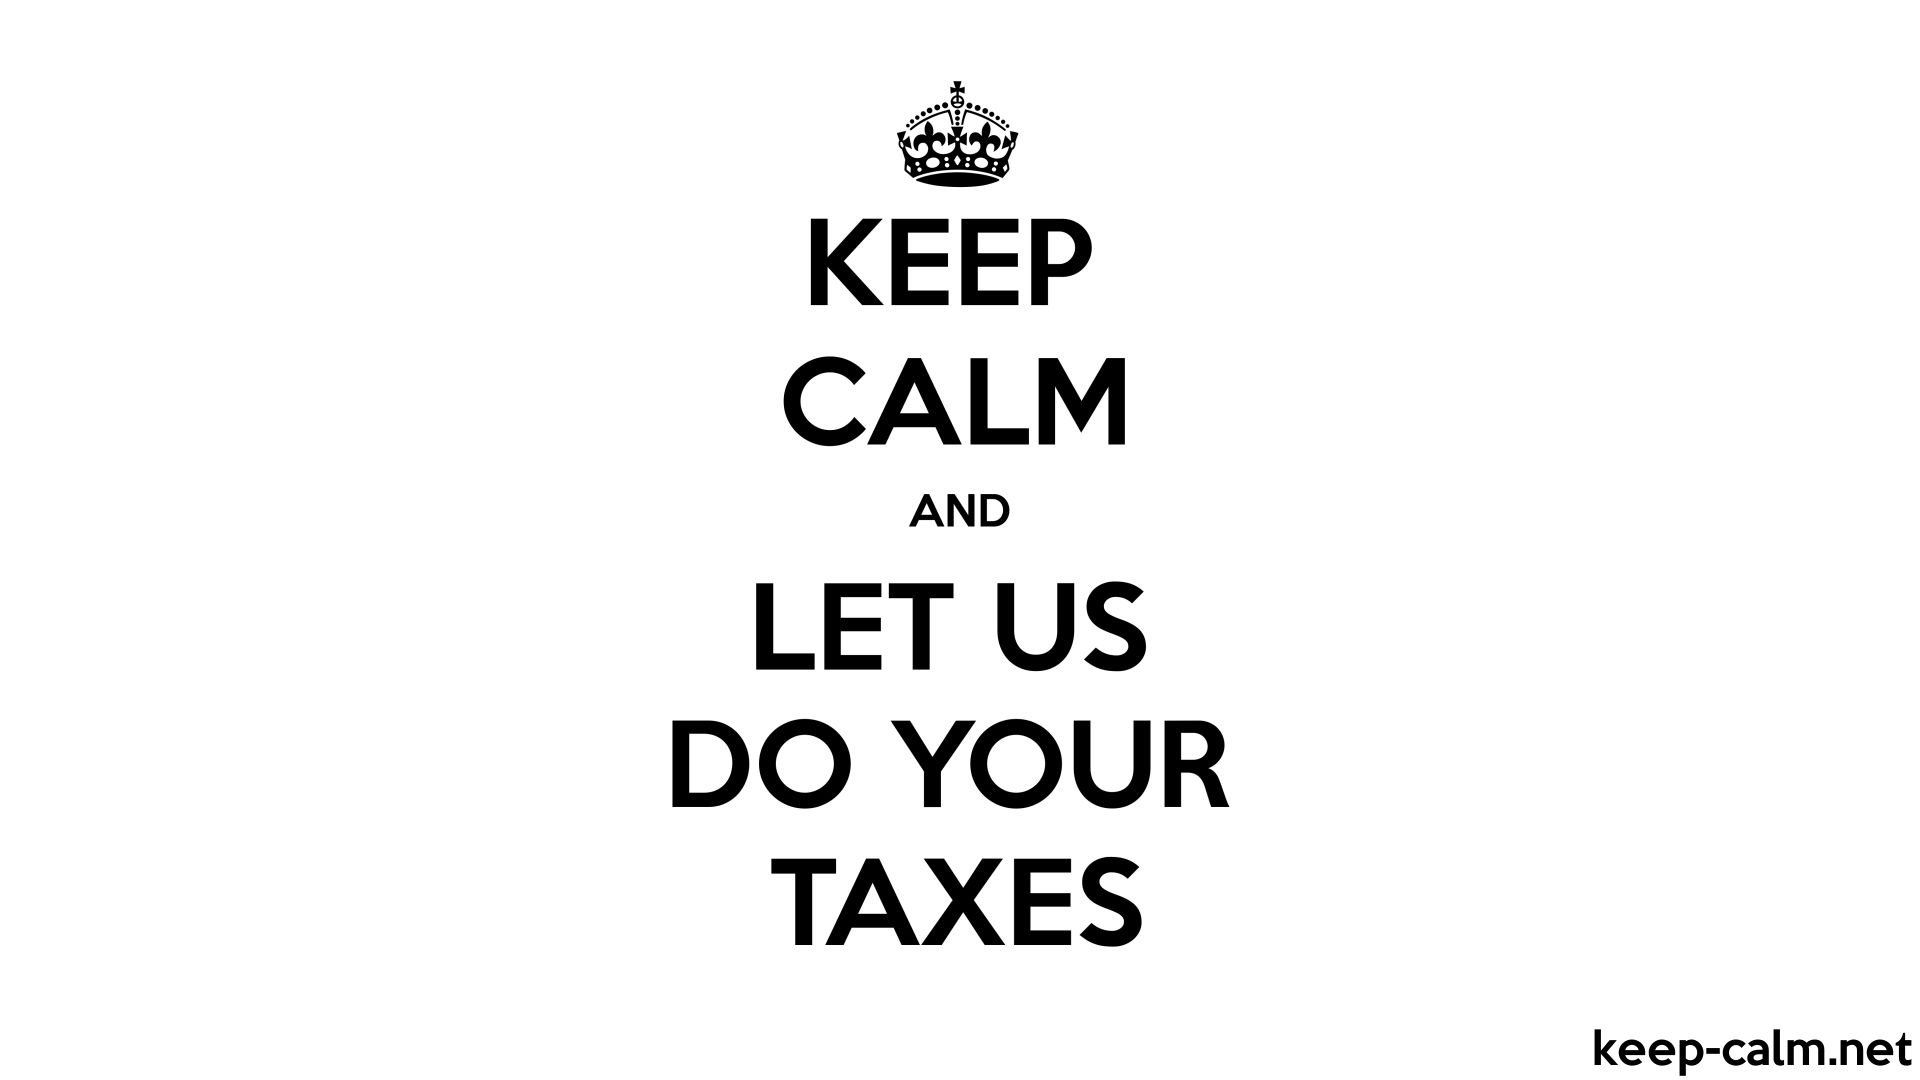 KEEP CALM AND LET US DO YOUR TAXES